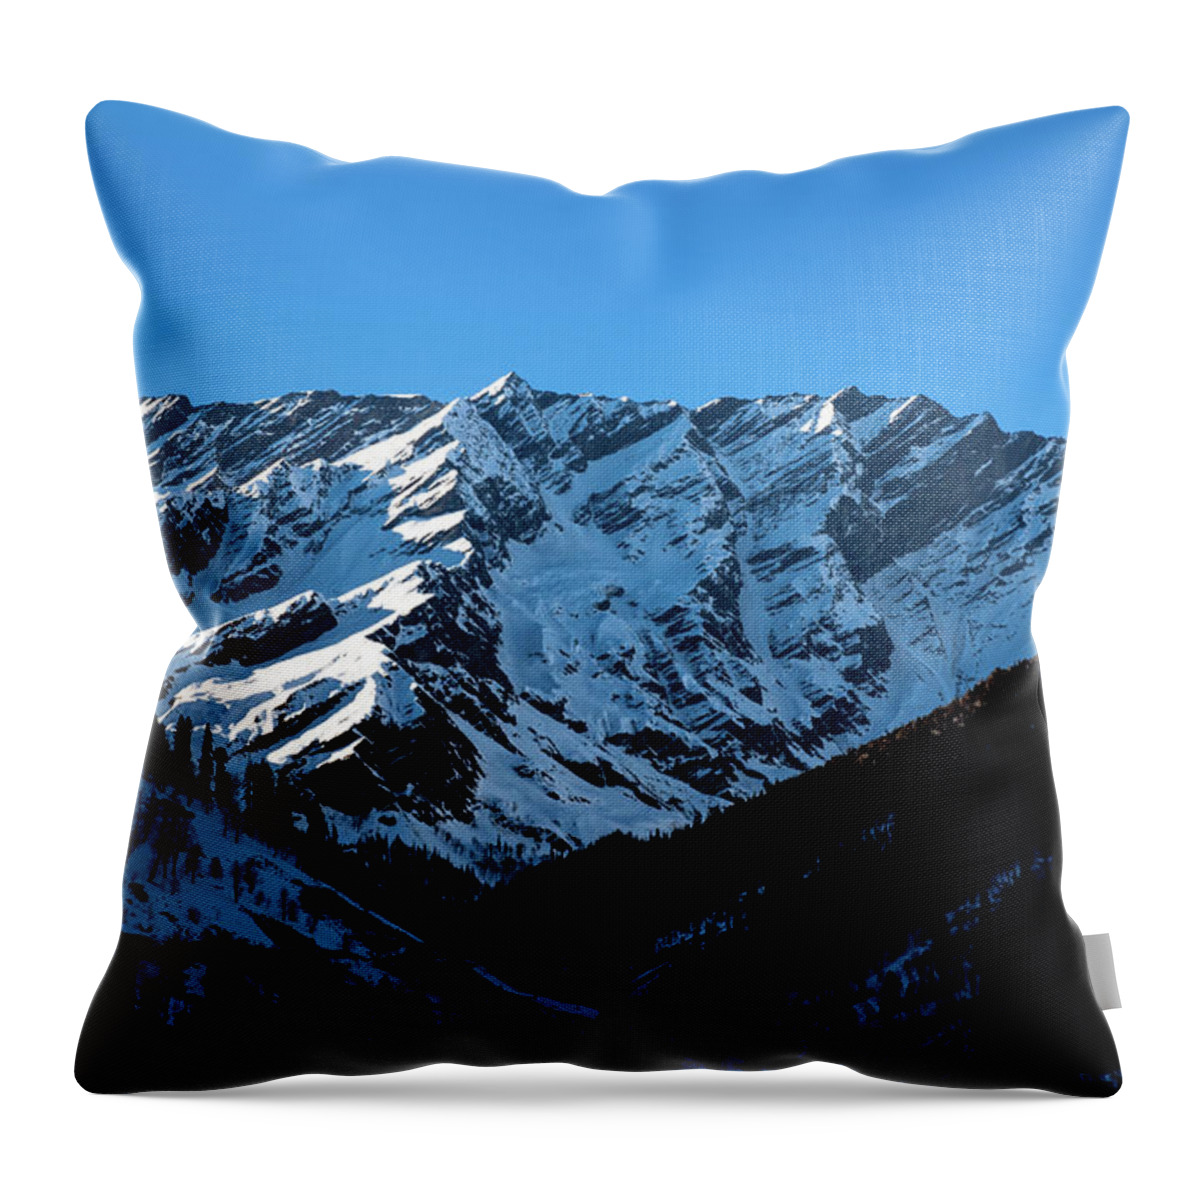 Tranquility Throw Pillow featuring the photograph Icy Mountains, Shima Manali, India by Nishanth Jois